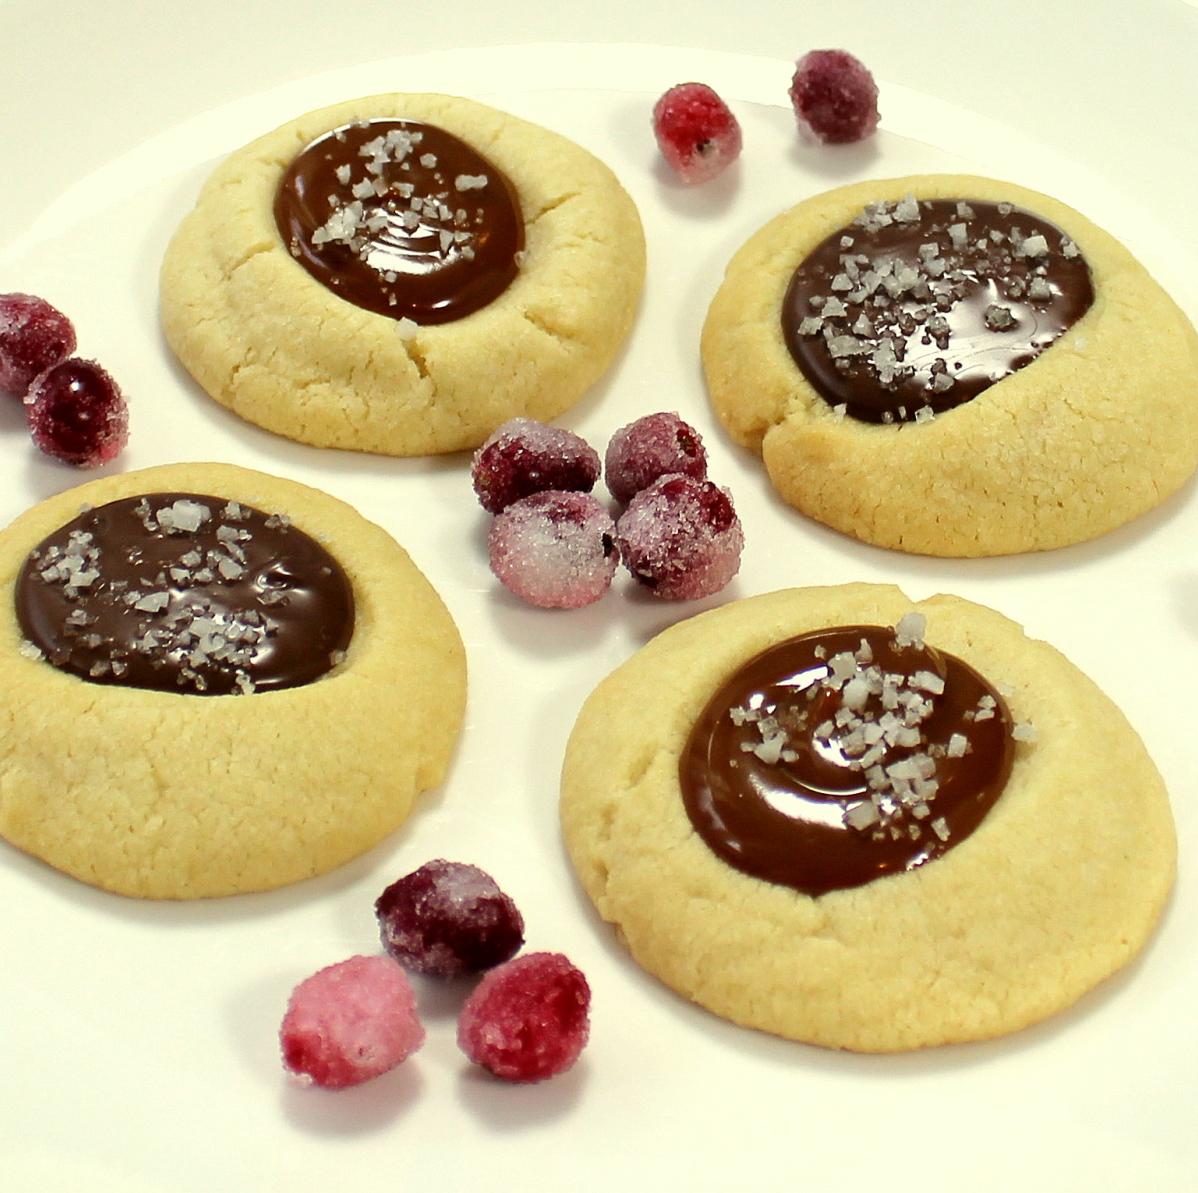  Get your thumbprint on - this recipe is worth it!